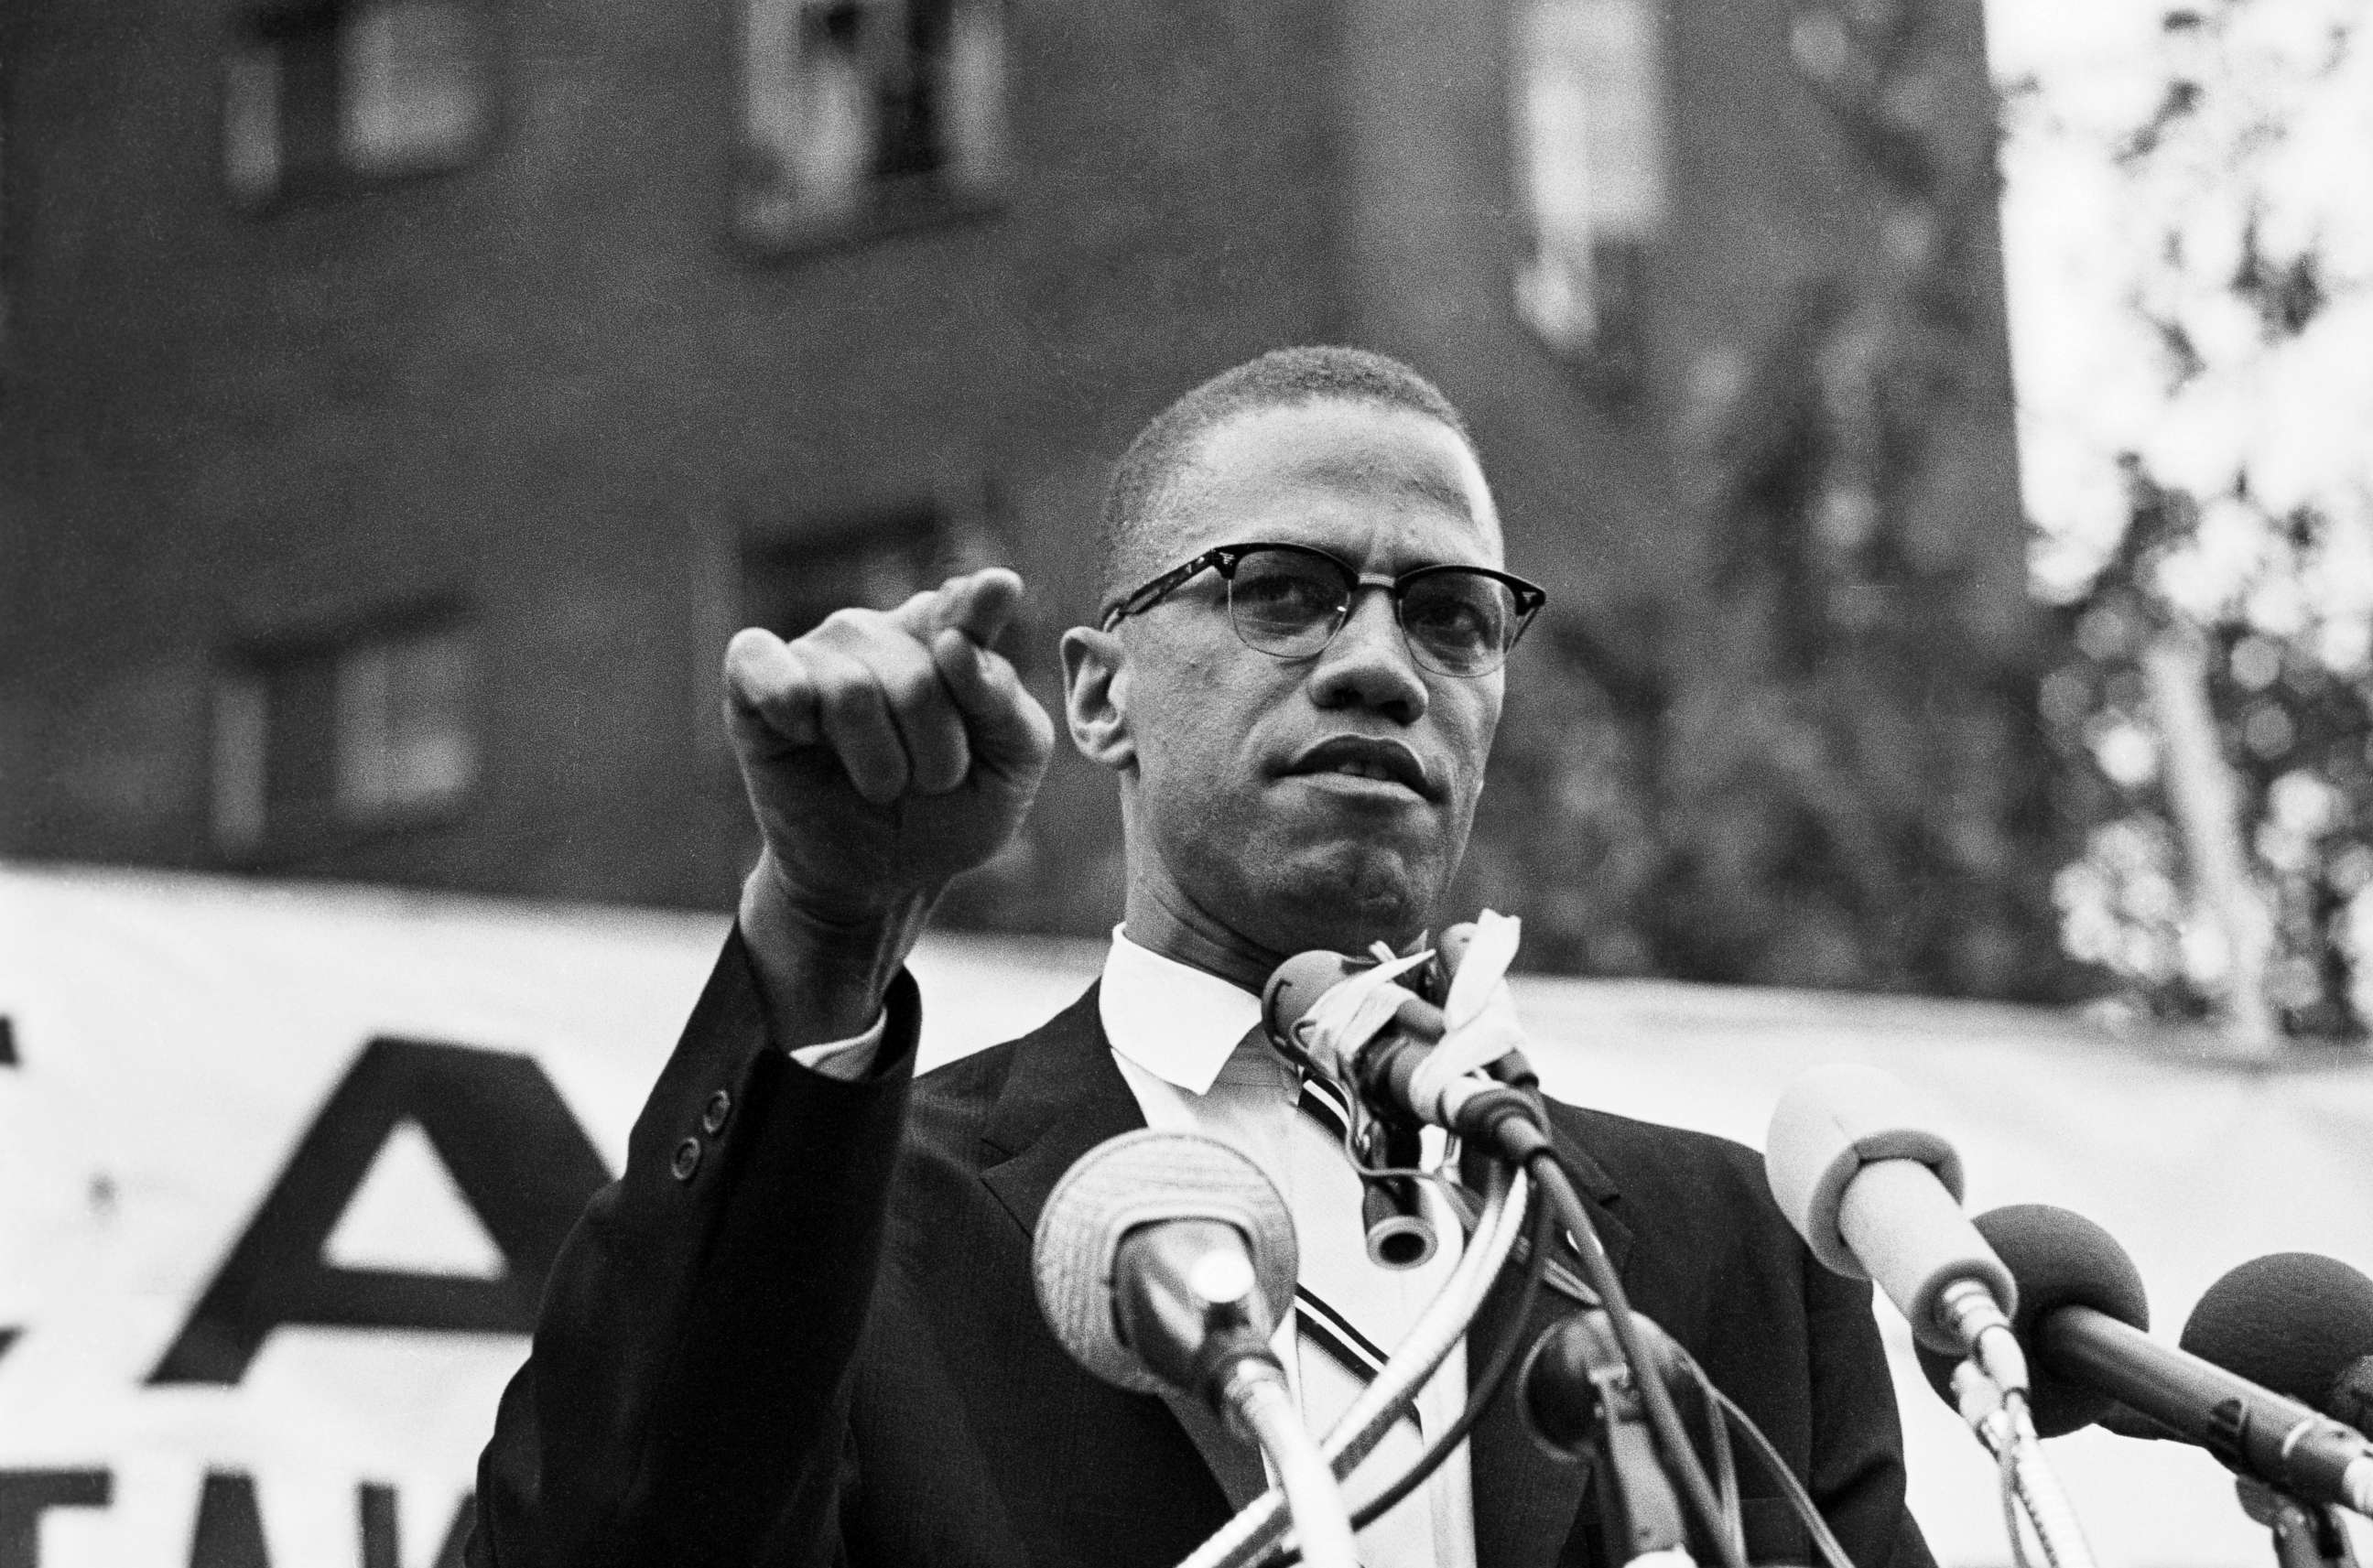 PHOTO: Malcolm X gestures during a speech at a rally.